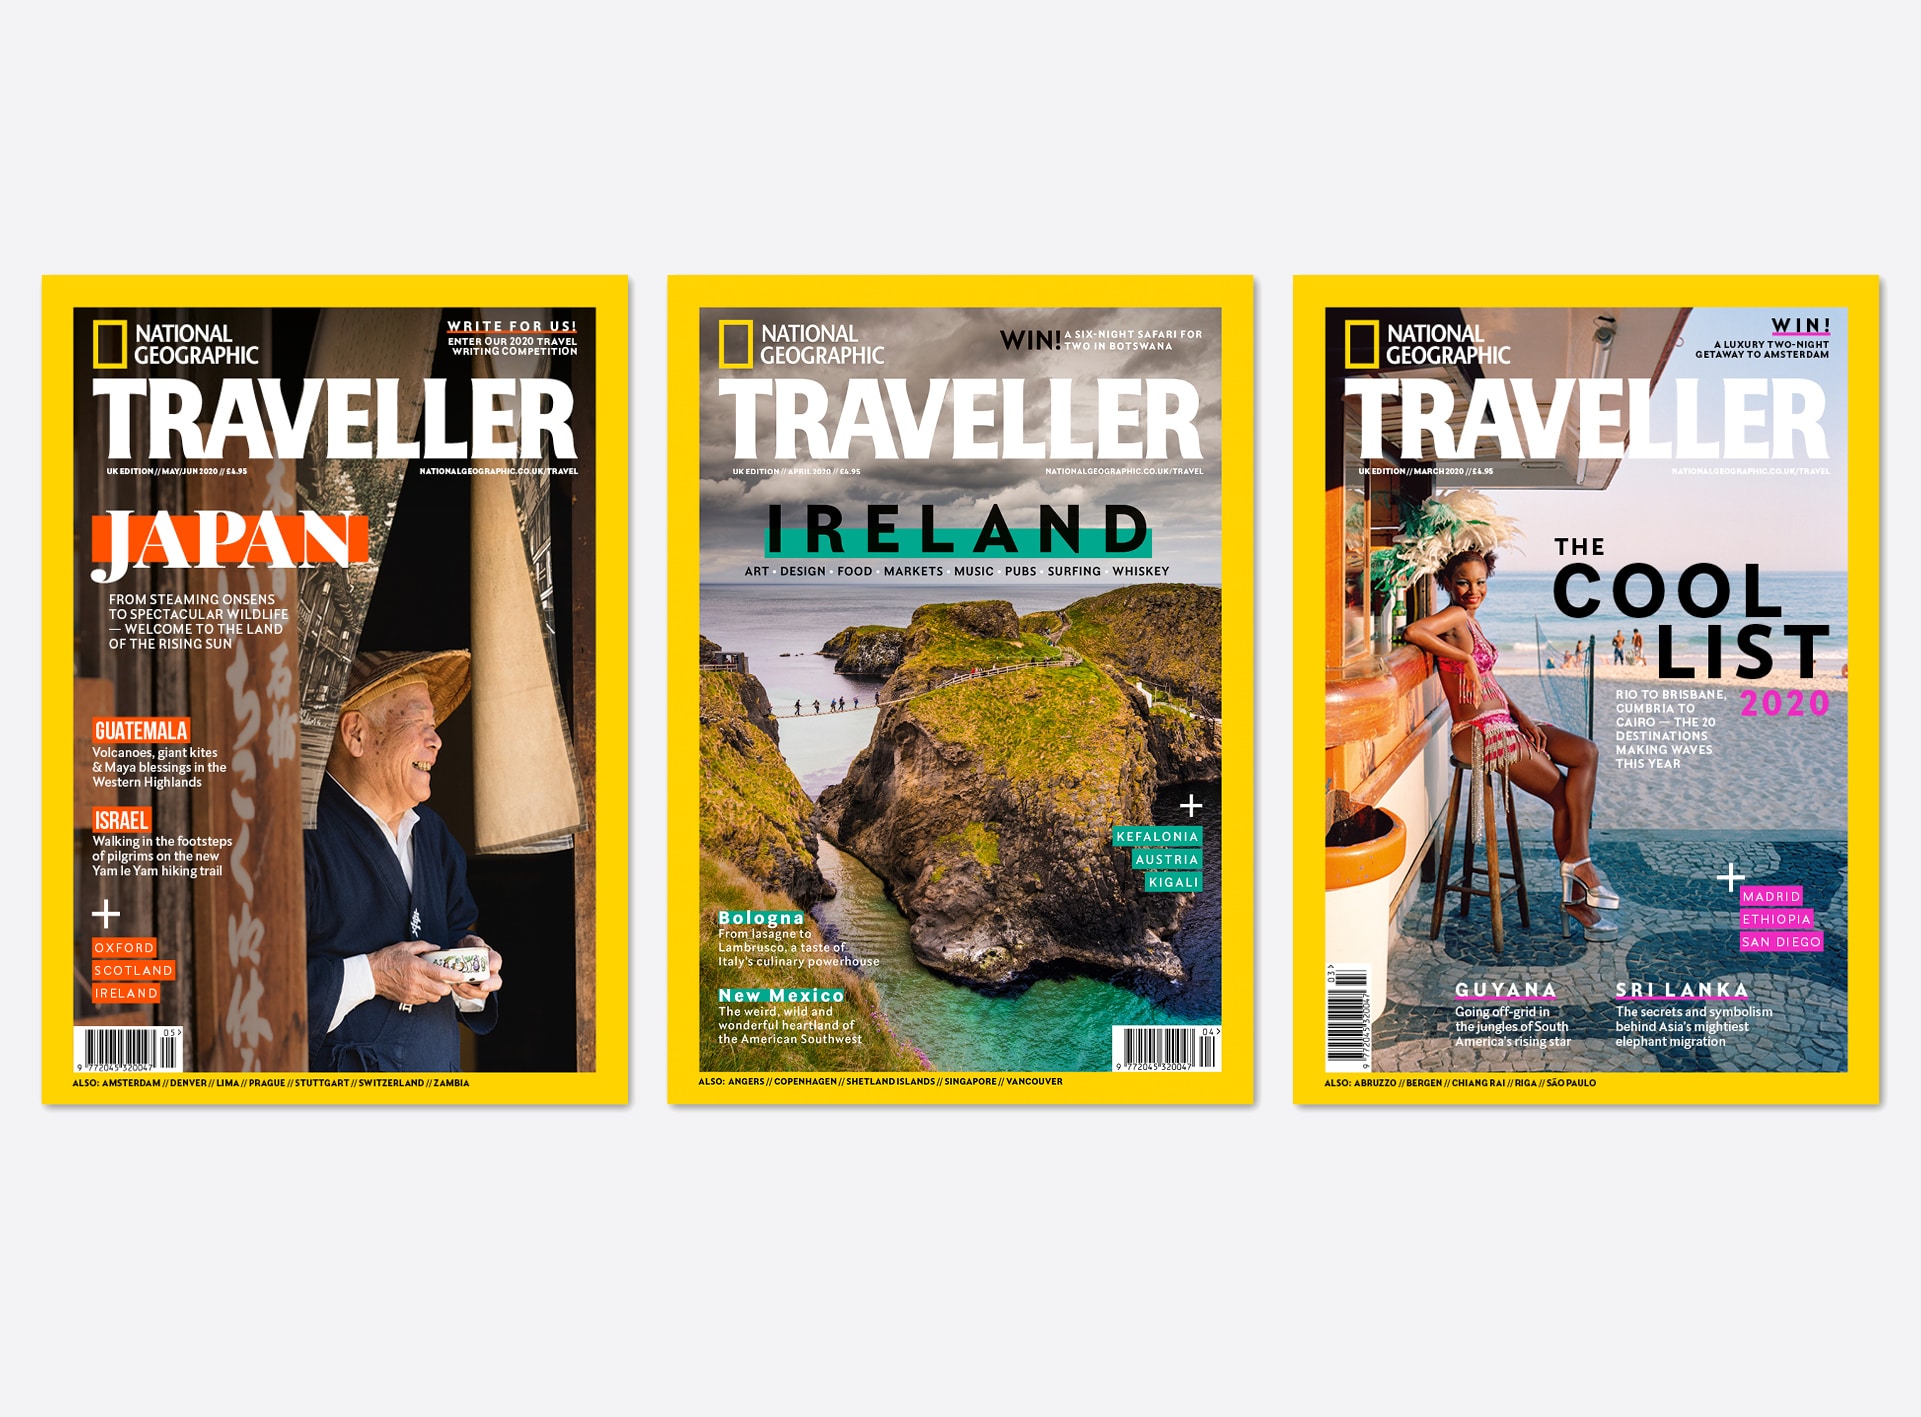 National Geographic Traveller covers